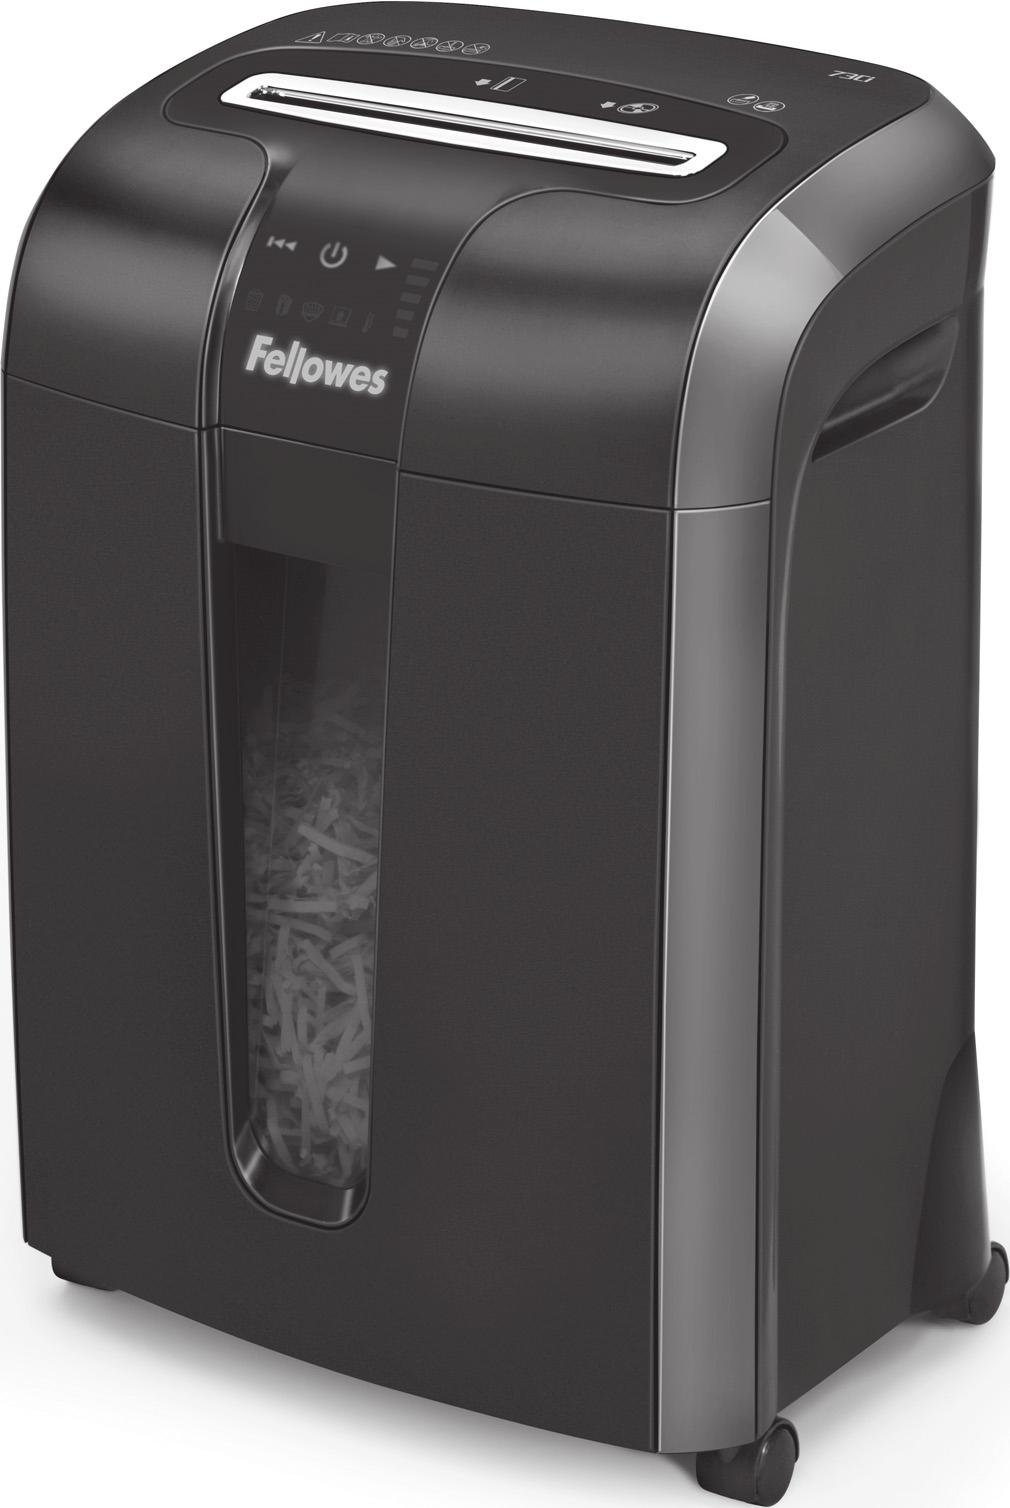 POWERSHRED 7Ci POWERSHRED 7Ci Declaration of Conformity Fellowes Manufacturing Company Yorkshire Way, West Moor Park, Doncaster, South Yorkshire, DN FB, England declares that the product Model 7Ci